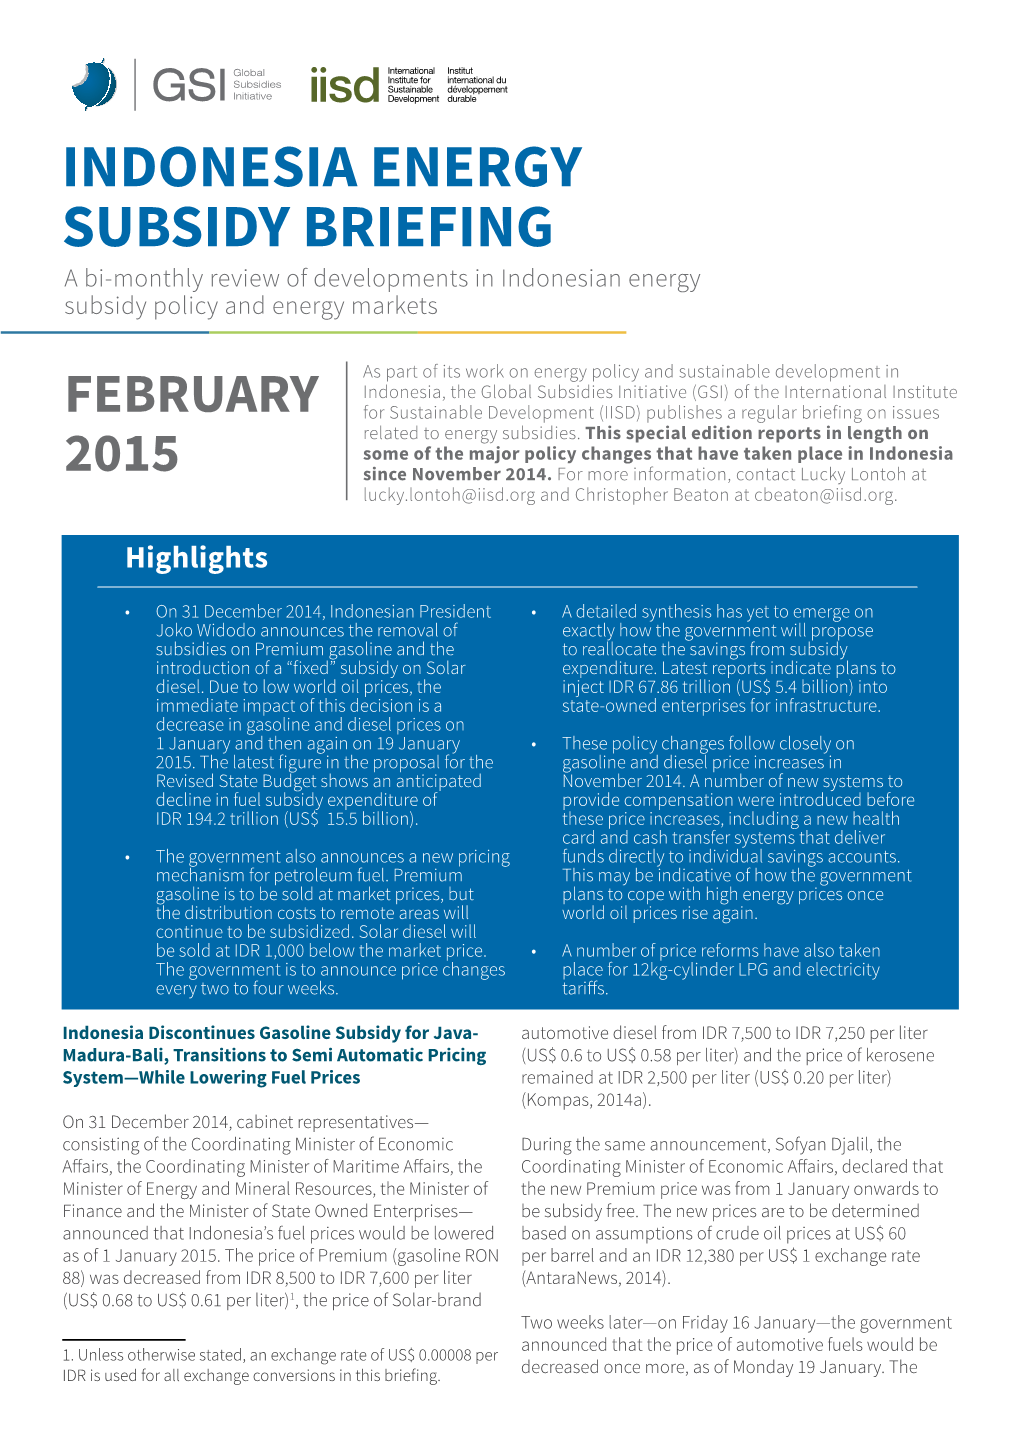 INDONESIA ENERGY SUBSIDY BRIEFING a Bi-Monthly Review of Developments in Indonesian Energy Subsidy Policy and Energy Markets